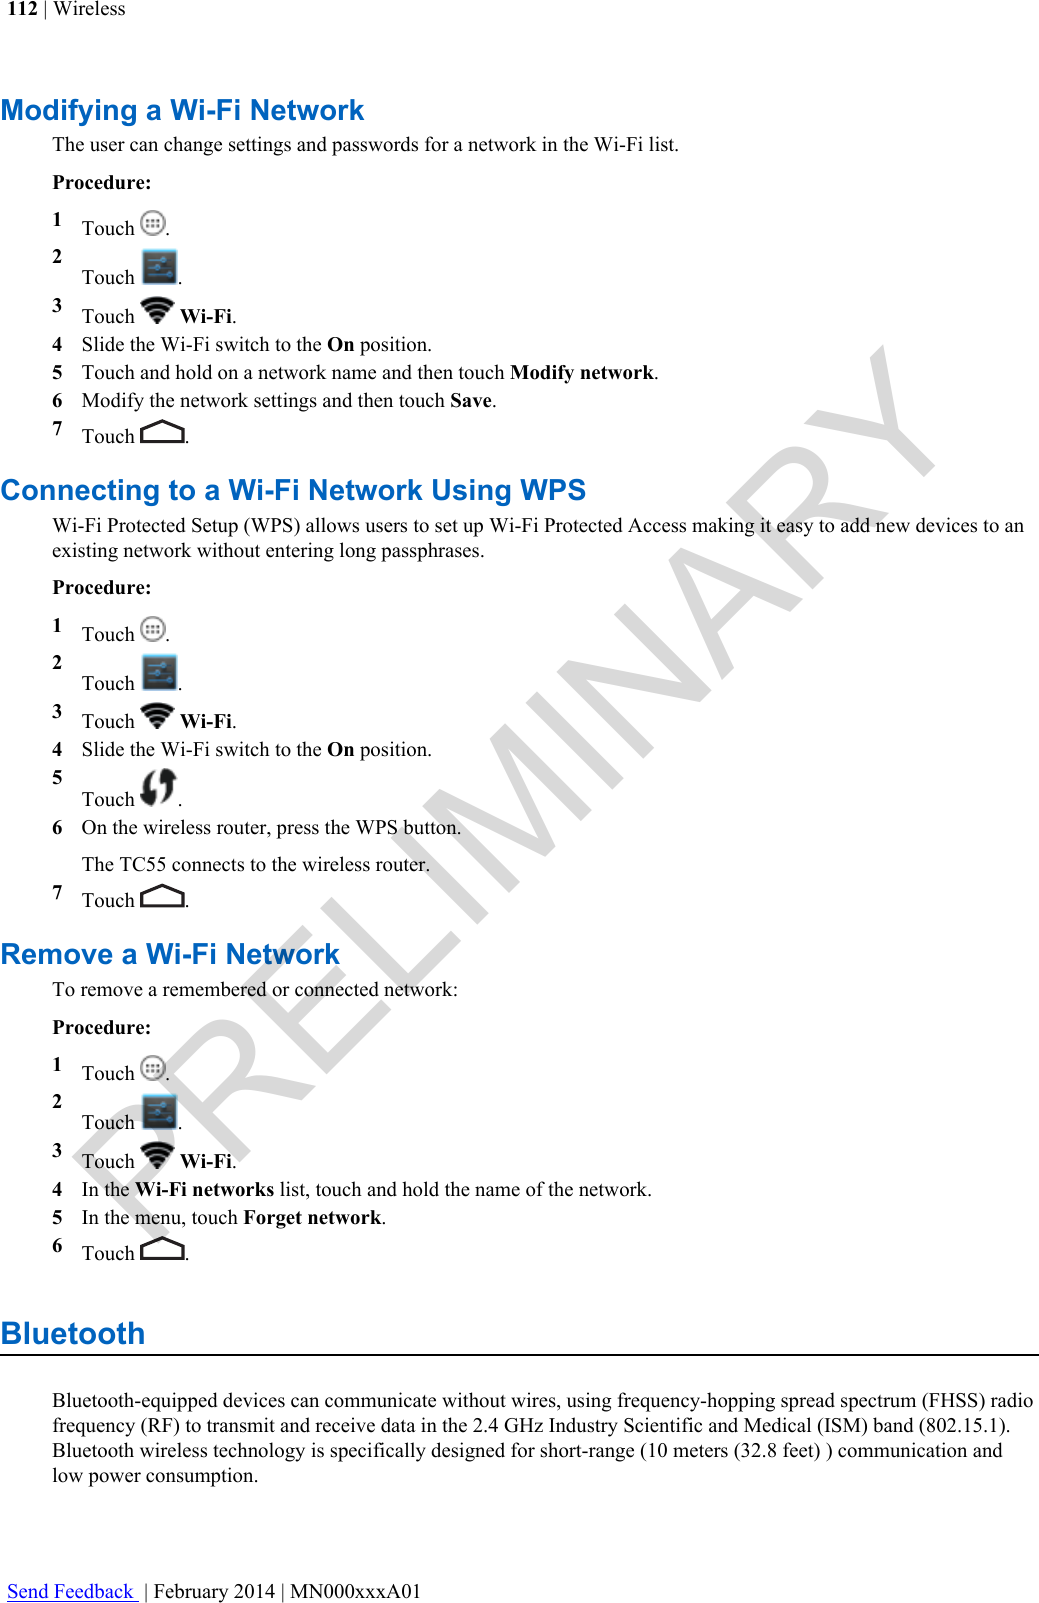 Modifying a Wi-Fi NetworkThe user can change settings and passwords for a network in the Wi-Fi list.Procedure:1Touch  .2Touch  .3Touch   Wi-Fi.4Slide the Wi-Fi switch to the On position.5Touch and hold on a network name and then touch Modify network.6Modify the network settings and then touch Save.7Touch  .Connecting to a Wi-Fi Network Using WPSWi-Fi Protected Setup (WPS) allows users to set up Wi-Fi Protected Access making it easy to add new devices to anexisting network without entering long passphrases.Procedure:1Touch  .2Touch  .3Touch   Wi-Fi.4Slide the Wi-Fi switch to the On position.5Touch  .6On the wireless router, press the WPS button.The TC55 connects to the wireless router.7Touch  .Remove a Wi-Fi NetworkTo remove a remembered or connected network:Procedure:1Touch  .2Touch  .3Touch   Wi-Fi.4In the Wi-Fi networks list, touch and hold the name of the network.5In the menu, touch Forget network.6Touch  .BluetoothBluetooth-equipped devices can communicate without wires, using frequency-hopping spread spectrum (FHSS) radiofrequency (RF) to transmit and receive data in the 2.4 GHz Industry Scientific and Medical (ISM) band (802.15.1).Bluetooth wireless technology is specifically designed for short-range (10 meters (32.8 feet) ) communication andlow power consumption.112 | WirelessSend Feedback  | February 2014 | MN000xxxA01PRELIMINARY